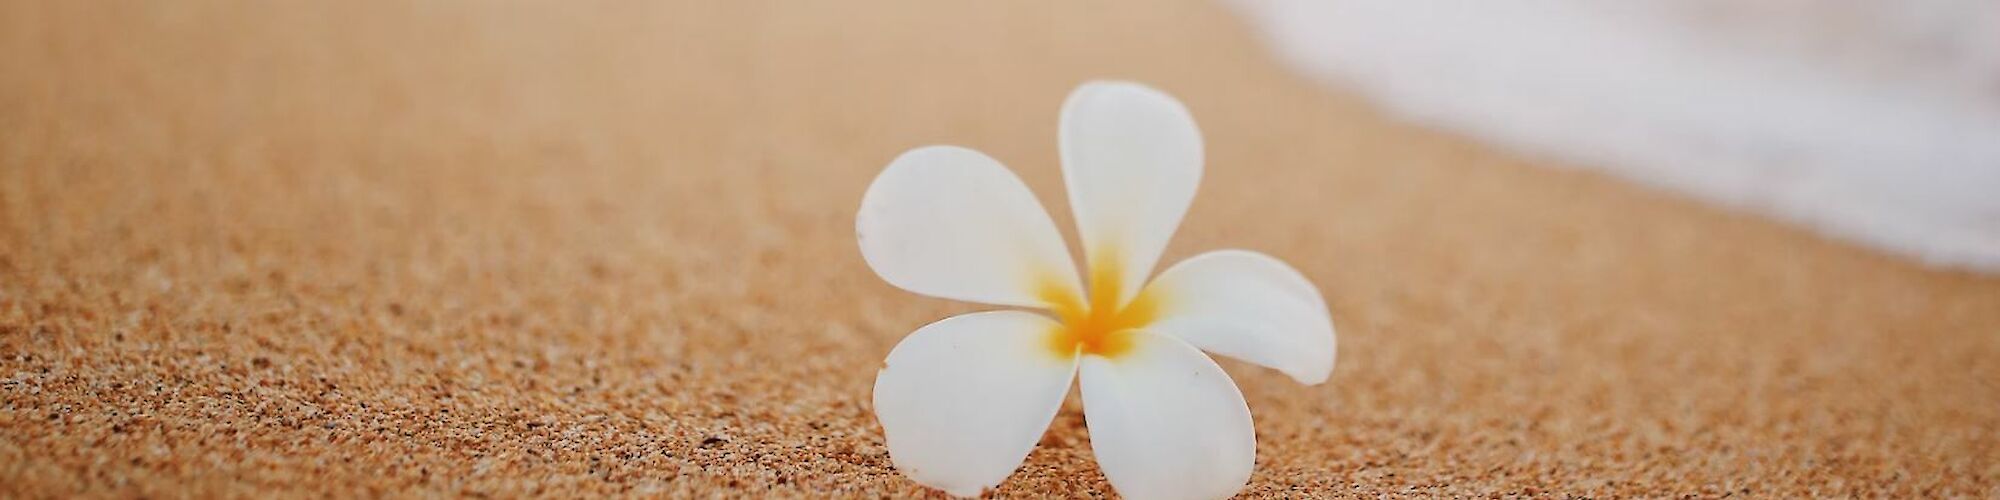 A white and yellow plumeria flower lies on a sandy beach near the water's edge, creating a serene and picturesque scene.